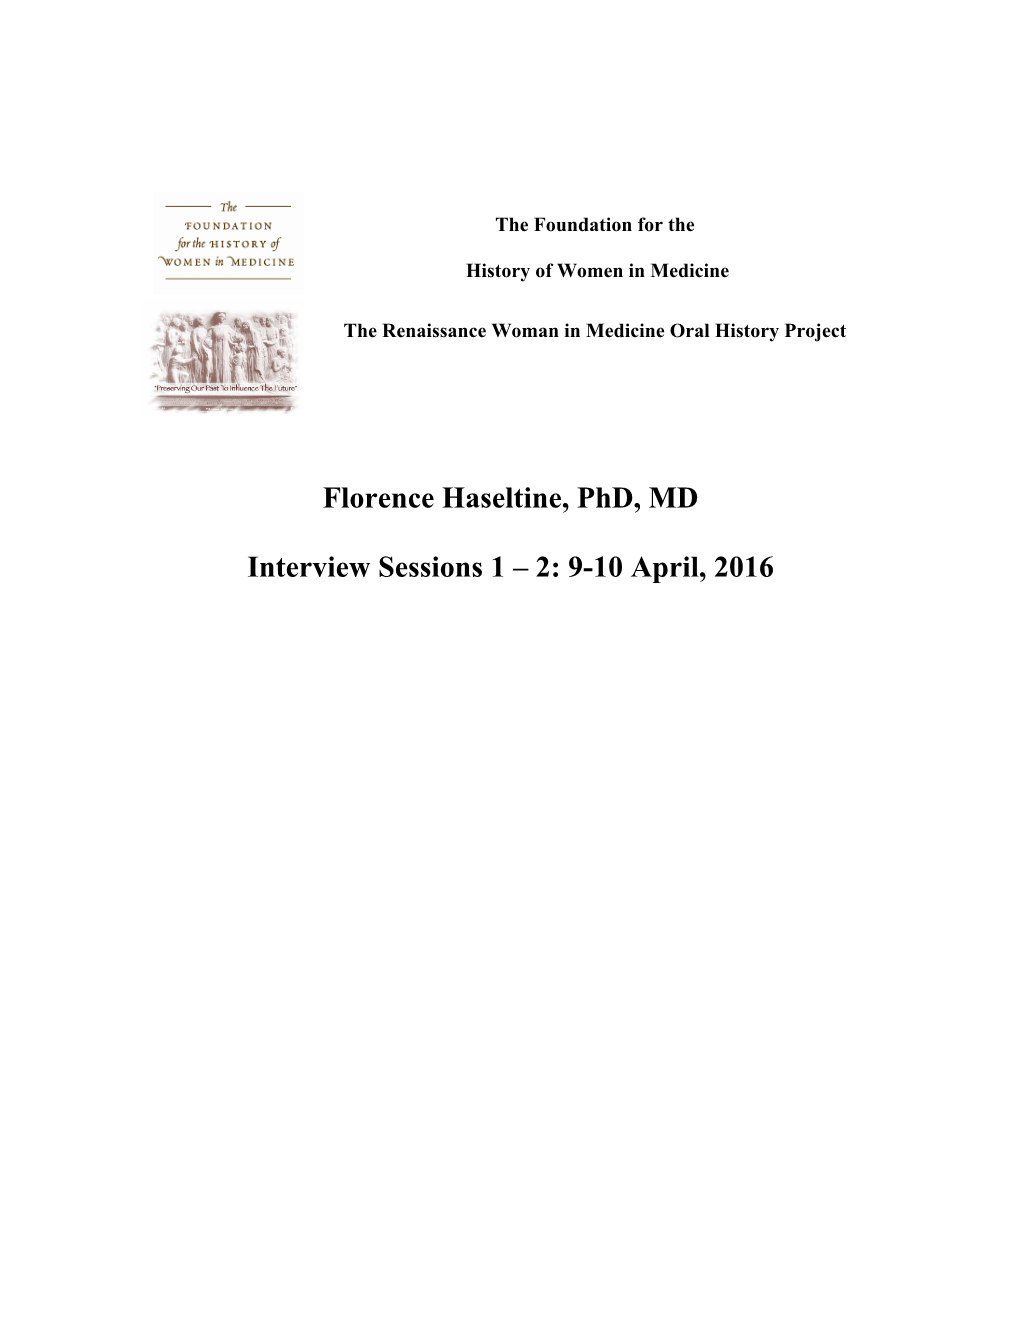 Florence Haseltine, Phd, MD Interview Sessions 1 – 2: 9-10 April